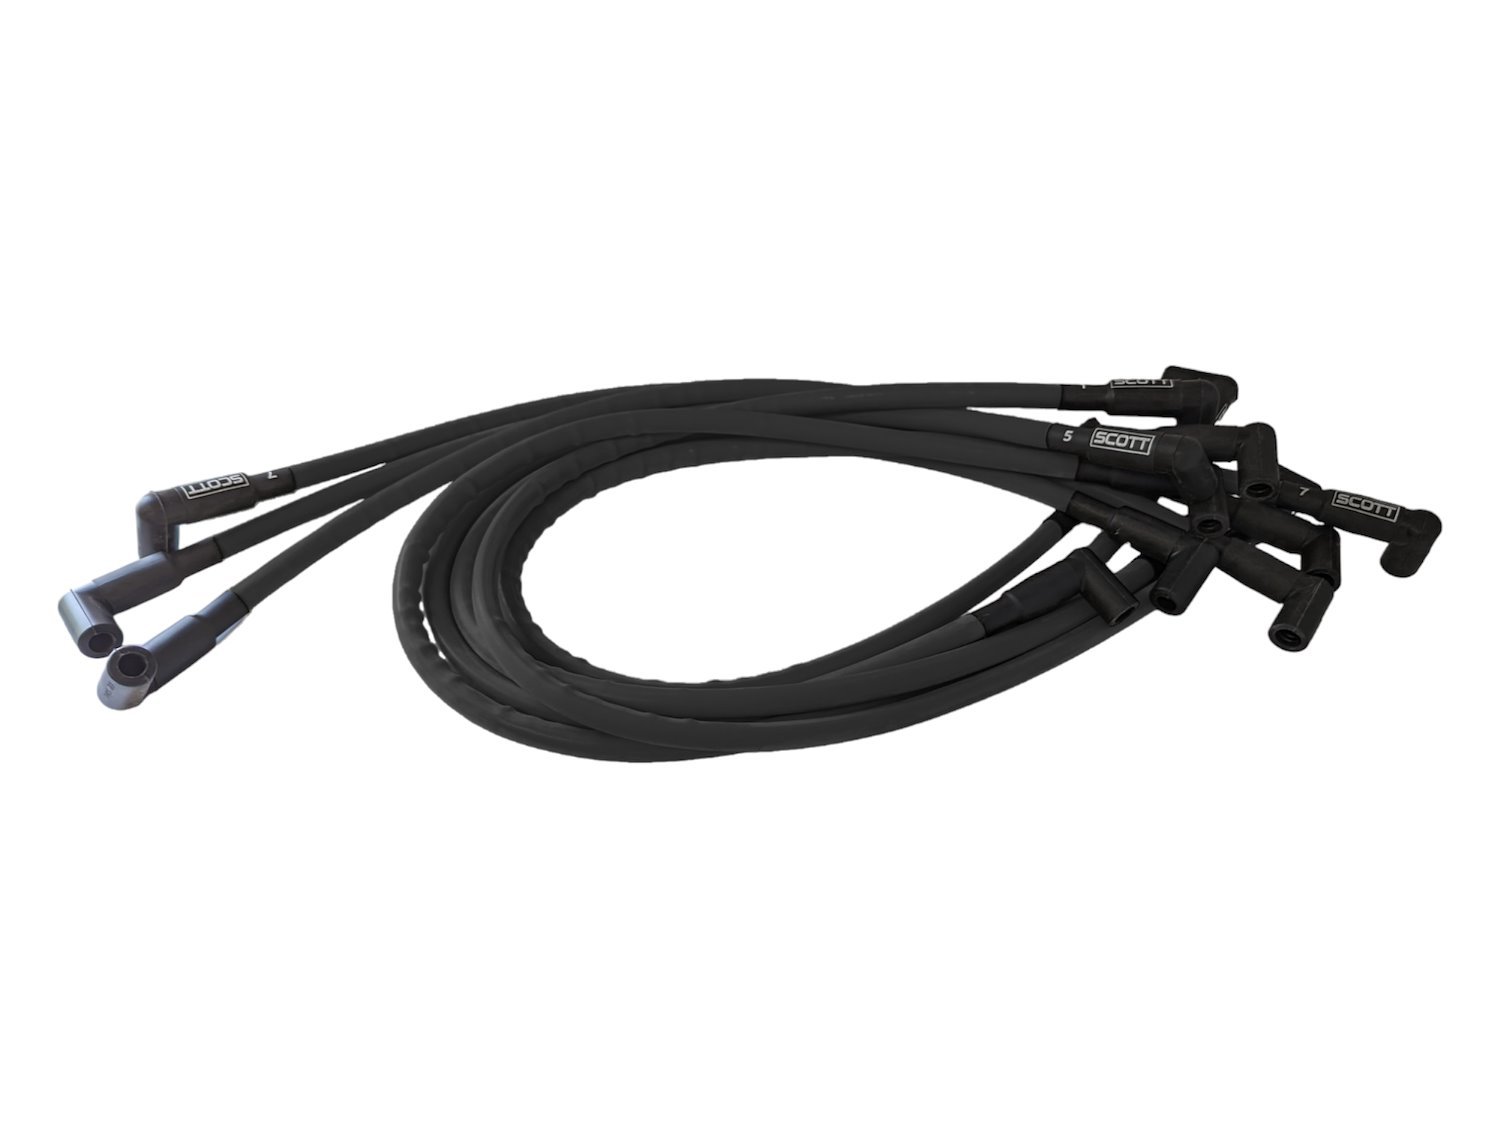 SPW-CH-604-1 High-Performance Silicone-Sleeved Spark Plug Wire Set for Small Block Chevy 604 Crate, Under Header [Black]